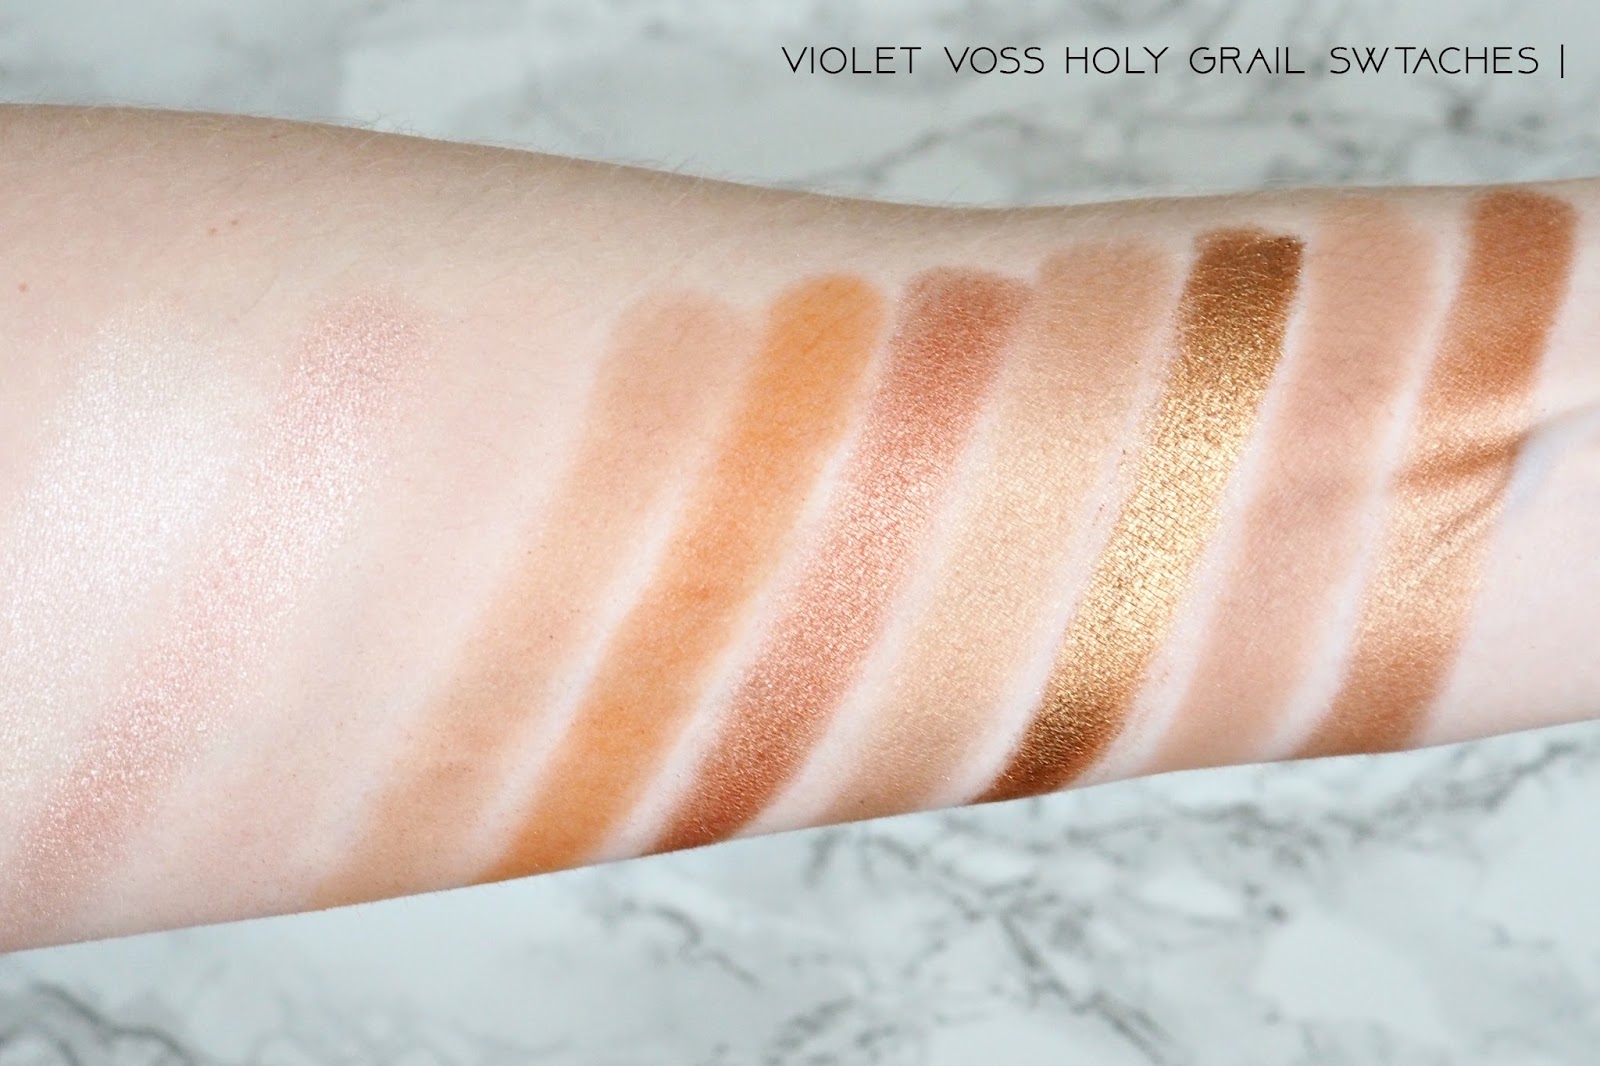 Violet Voss Holy Grail palette Swatches 